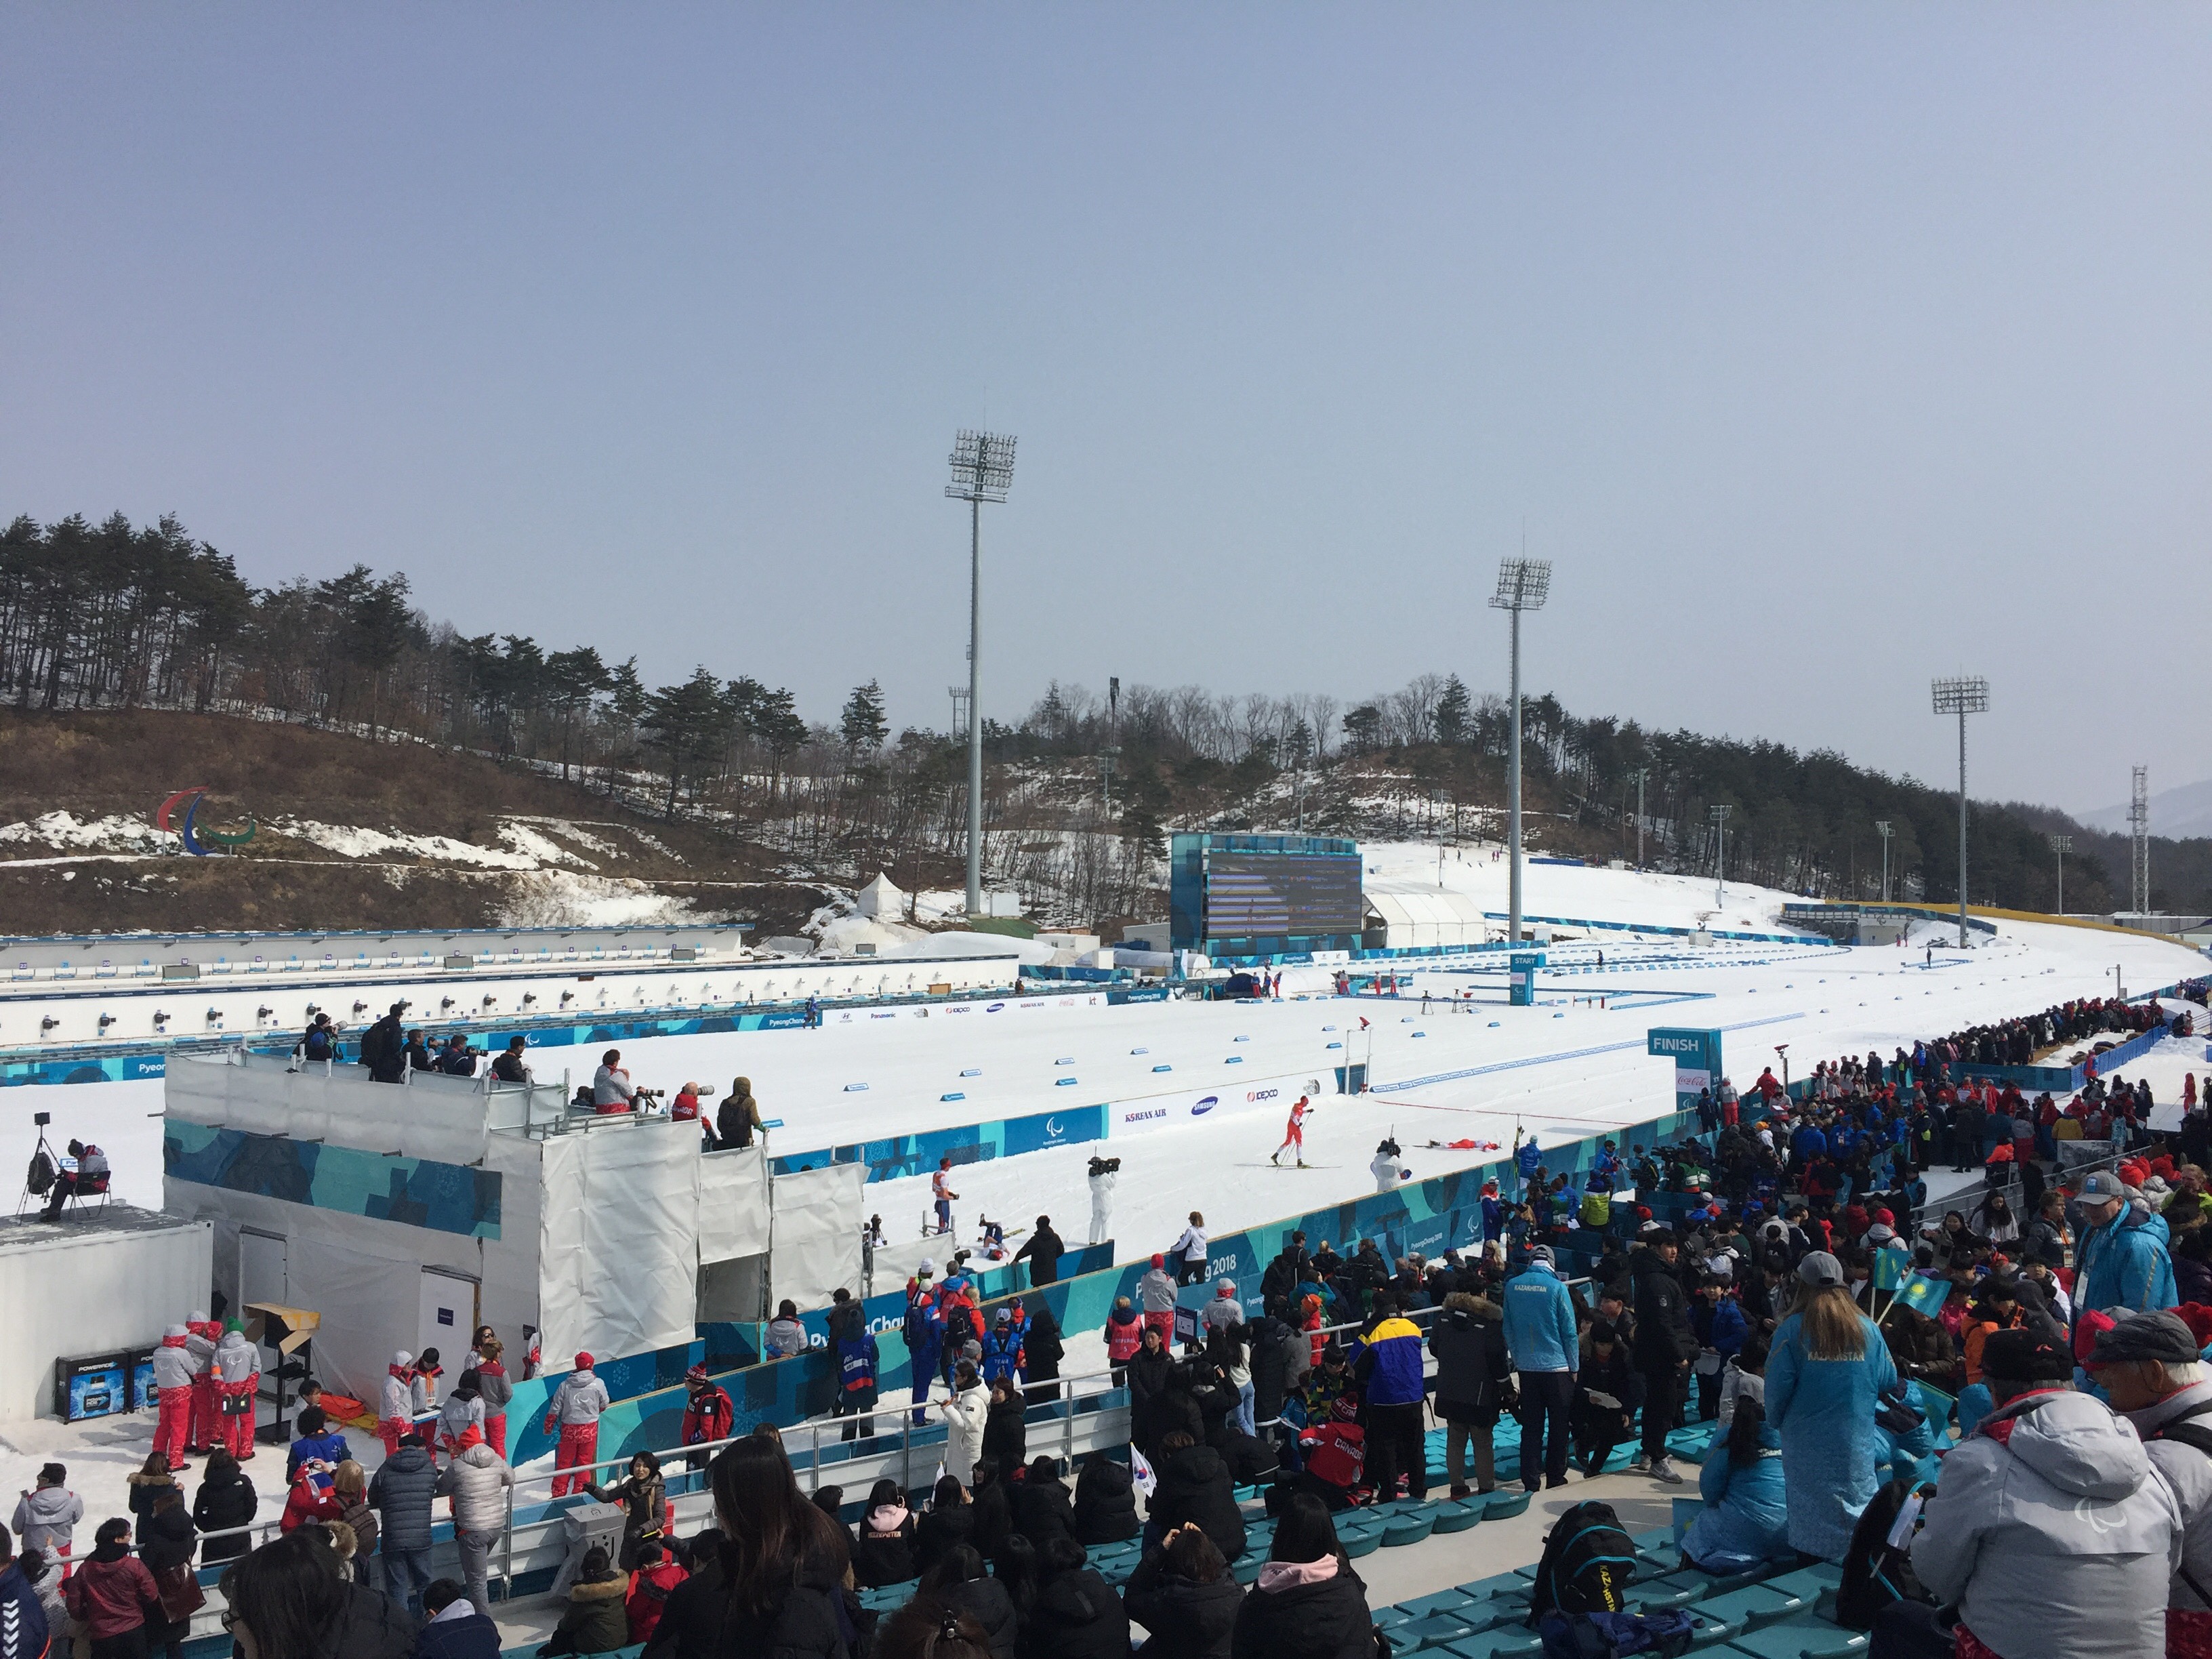 Spectators watch the track for Nordic events under a clear blue sky.